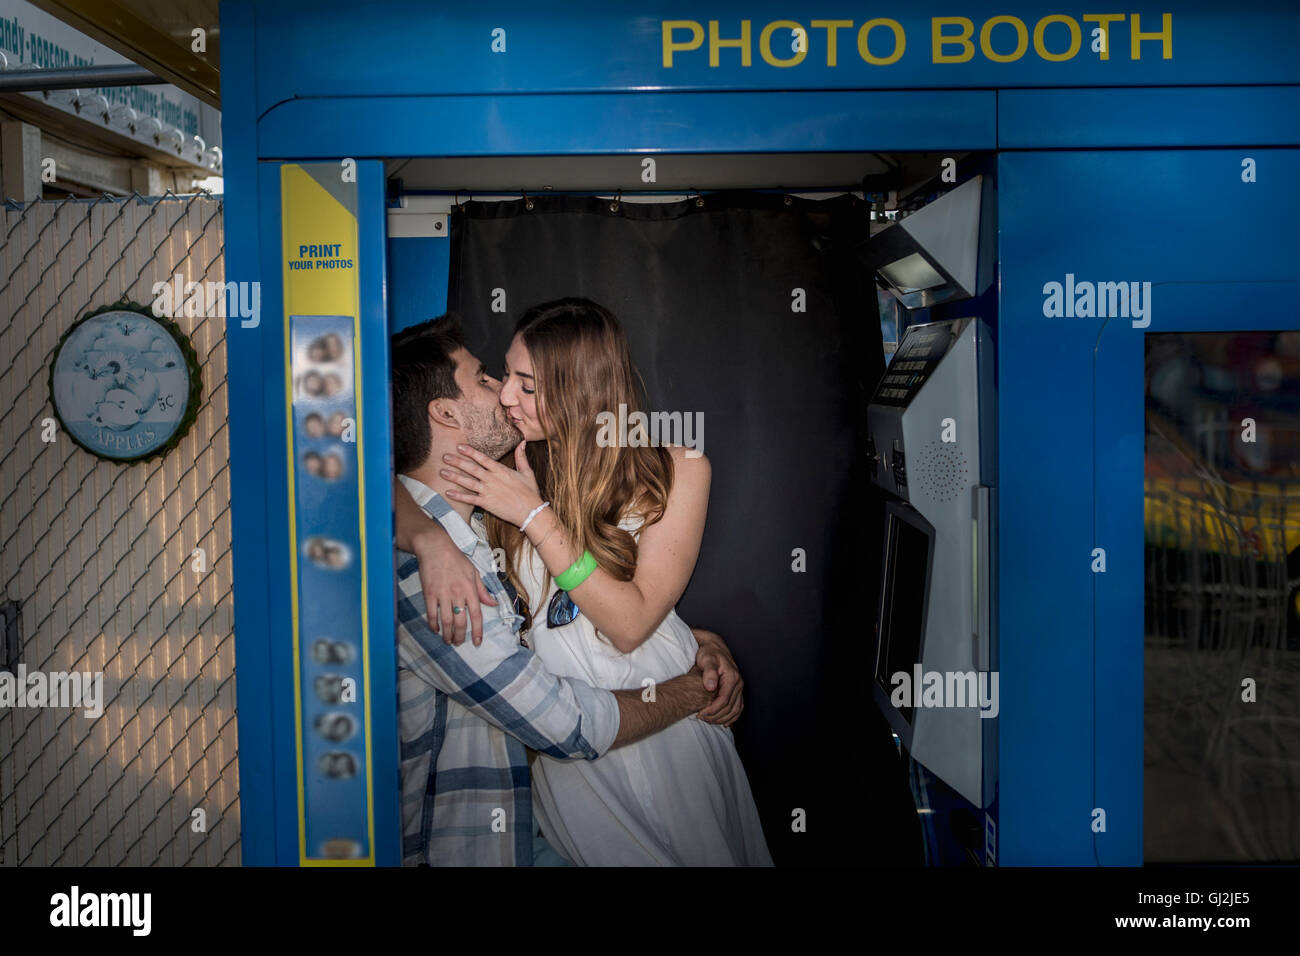 Pose Pro's Photo Booth - Photo Booth - College Station, TX - WeddingWire